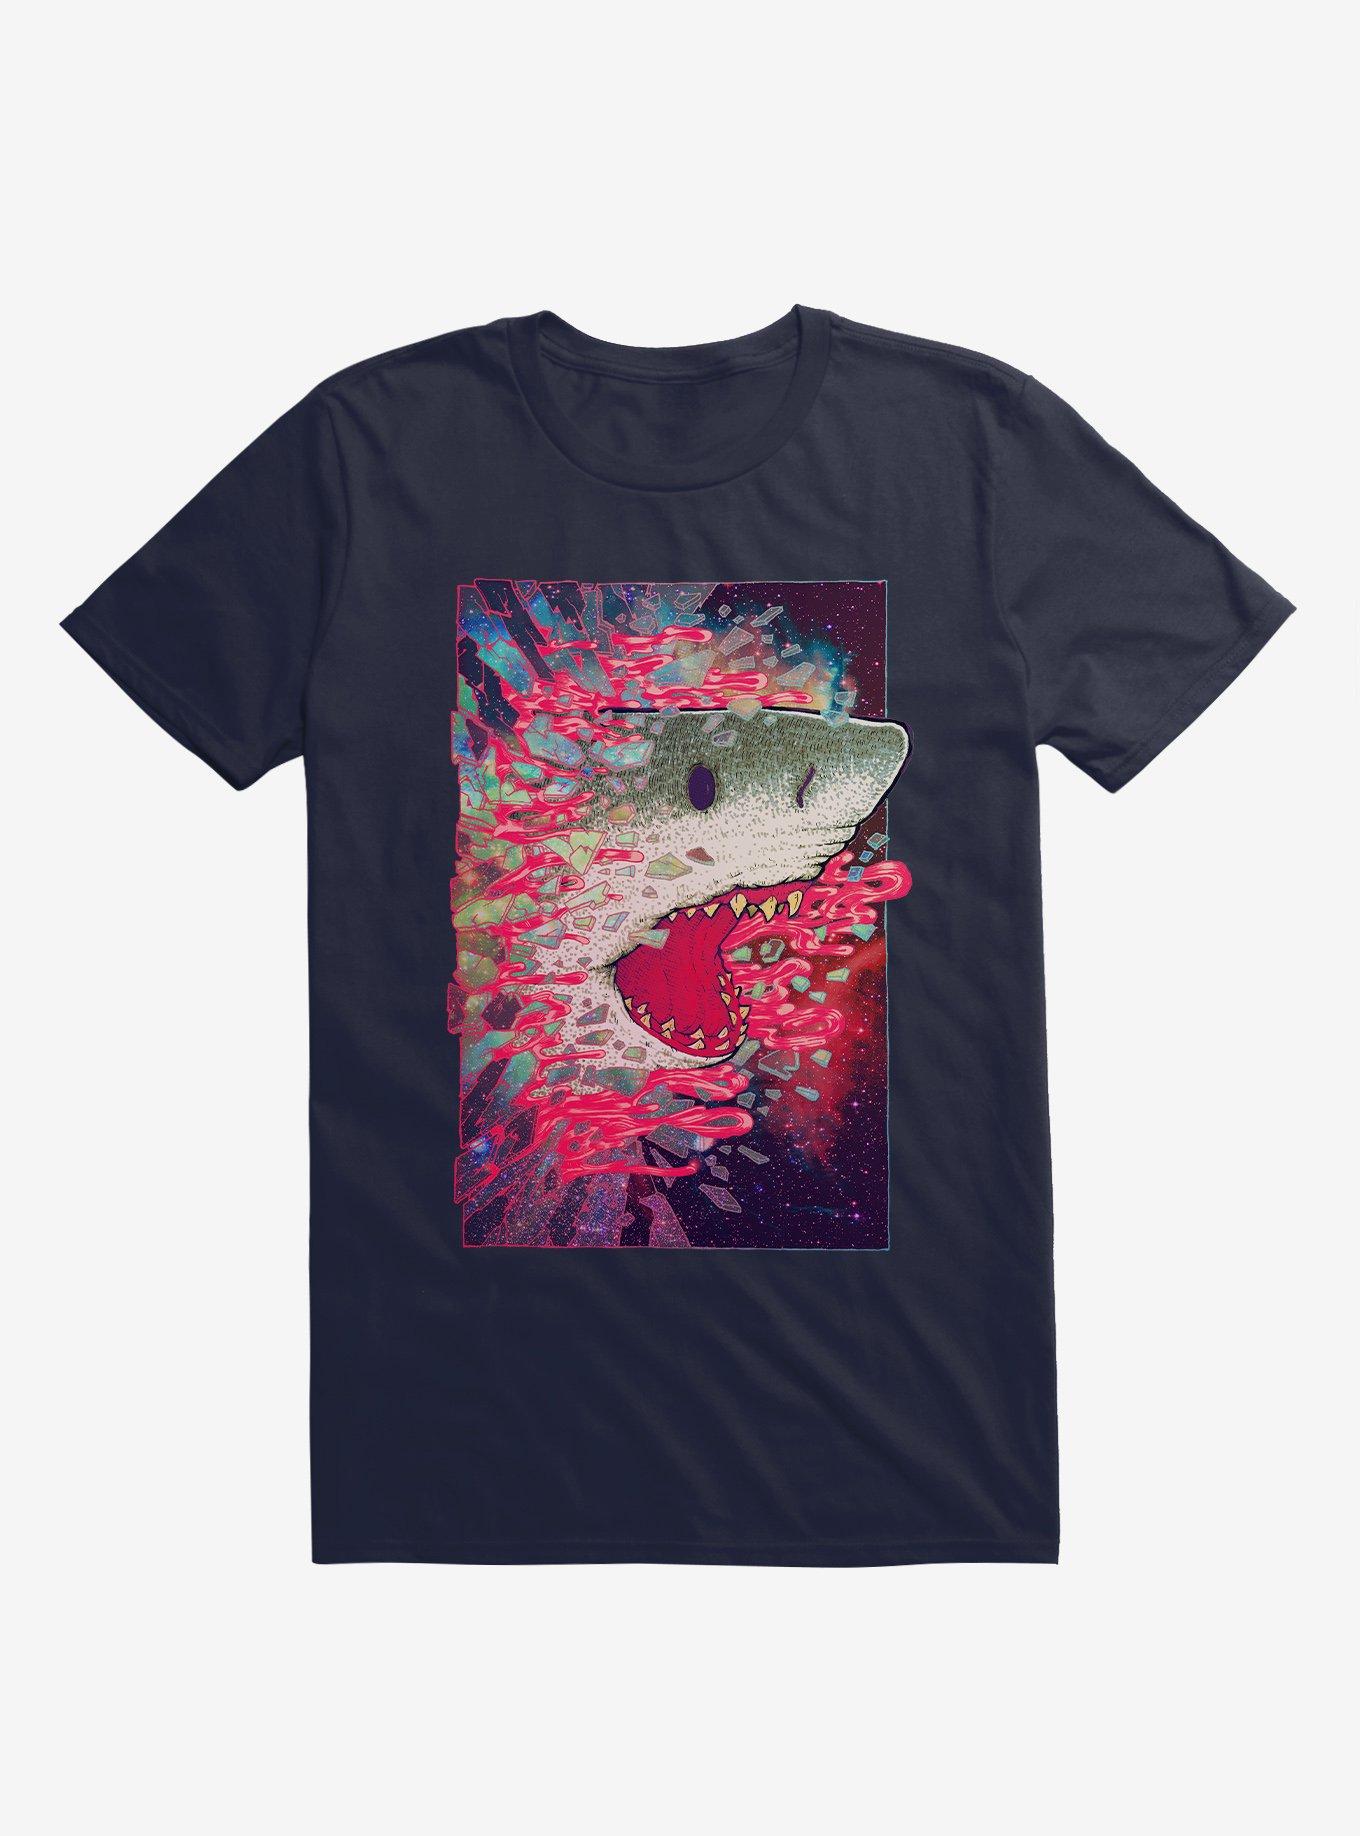 Shark From Outer Space Galaxy Navy Blue T-Shirt